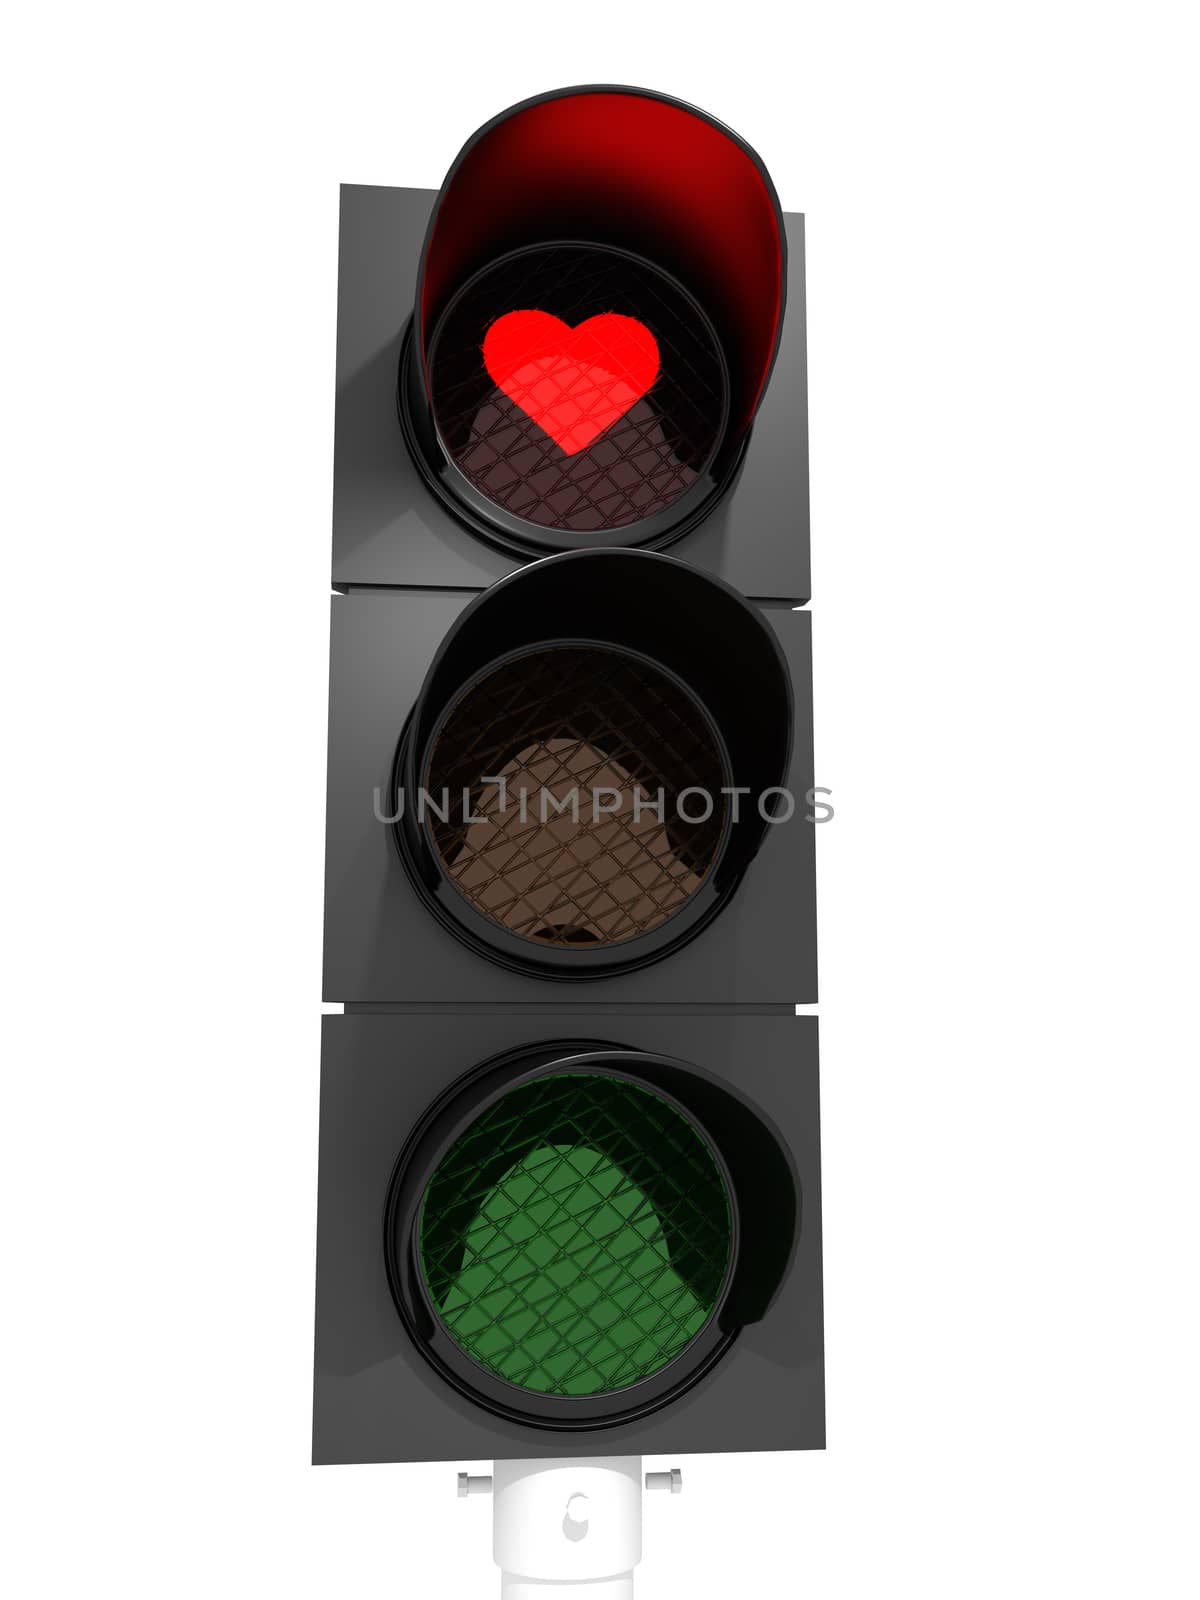 A traffic light showing a red heart in the red light.